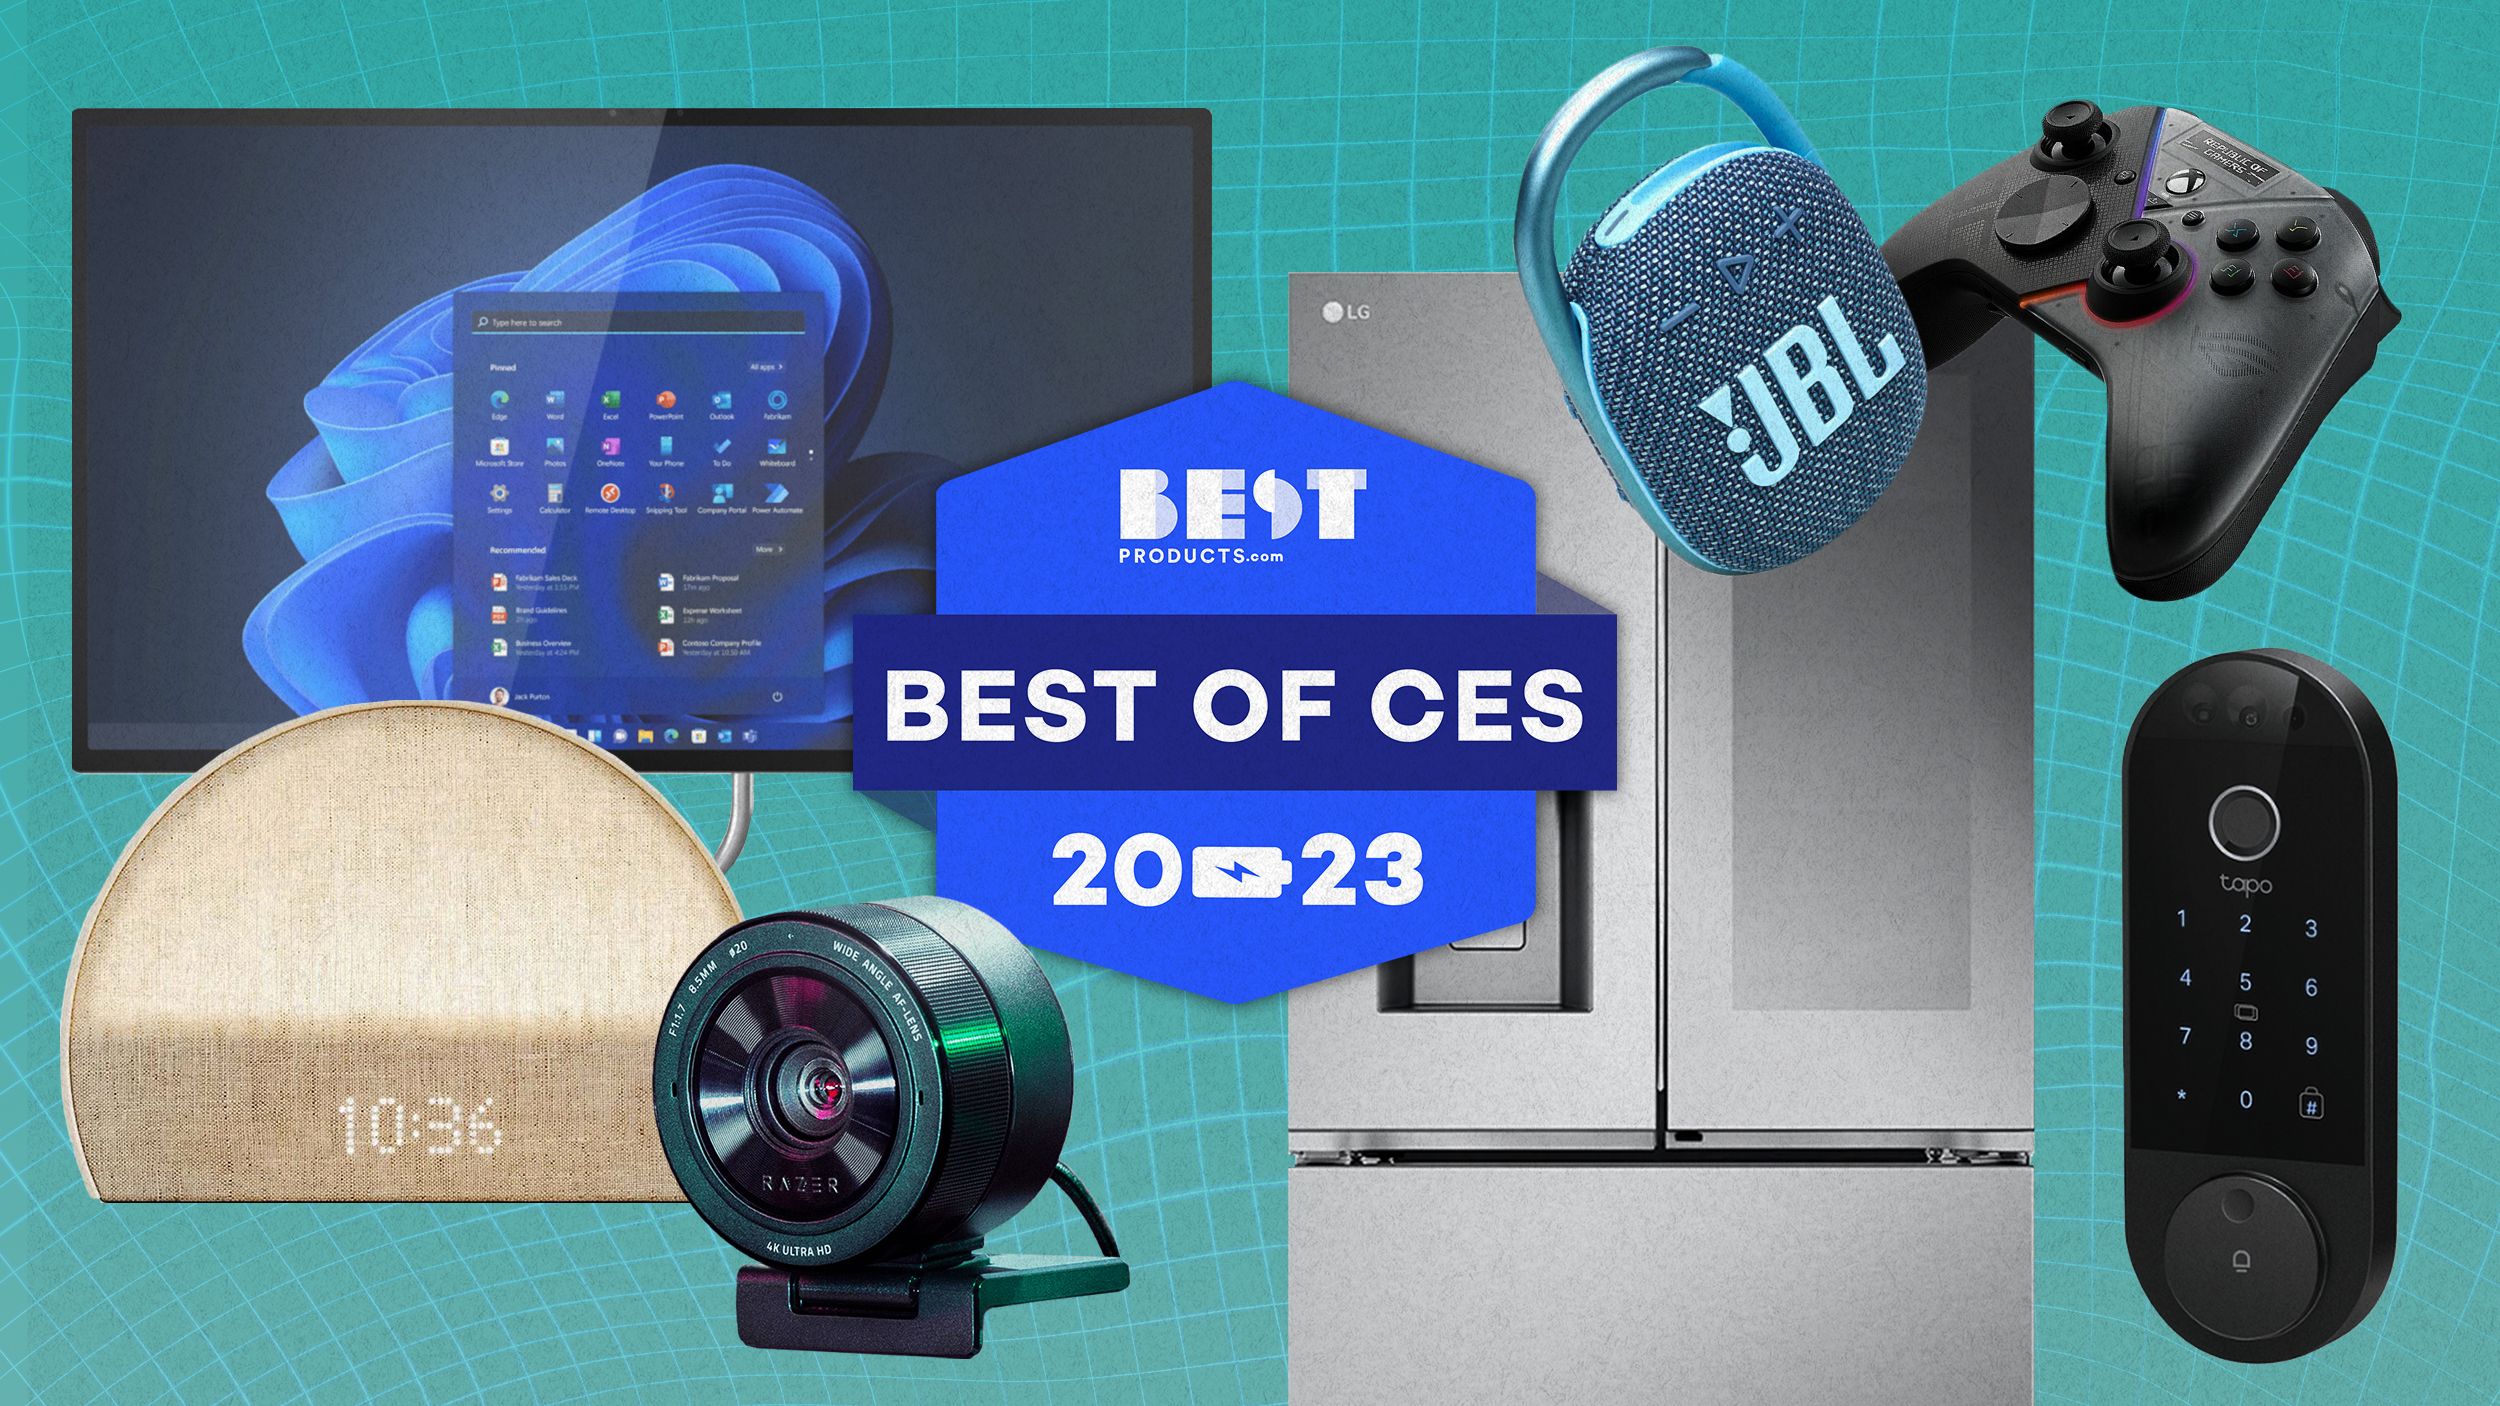 12 cool gadgets announced at CES 2022